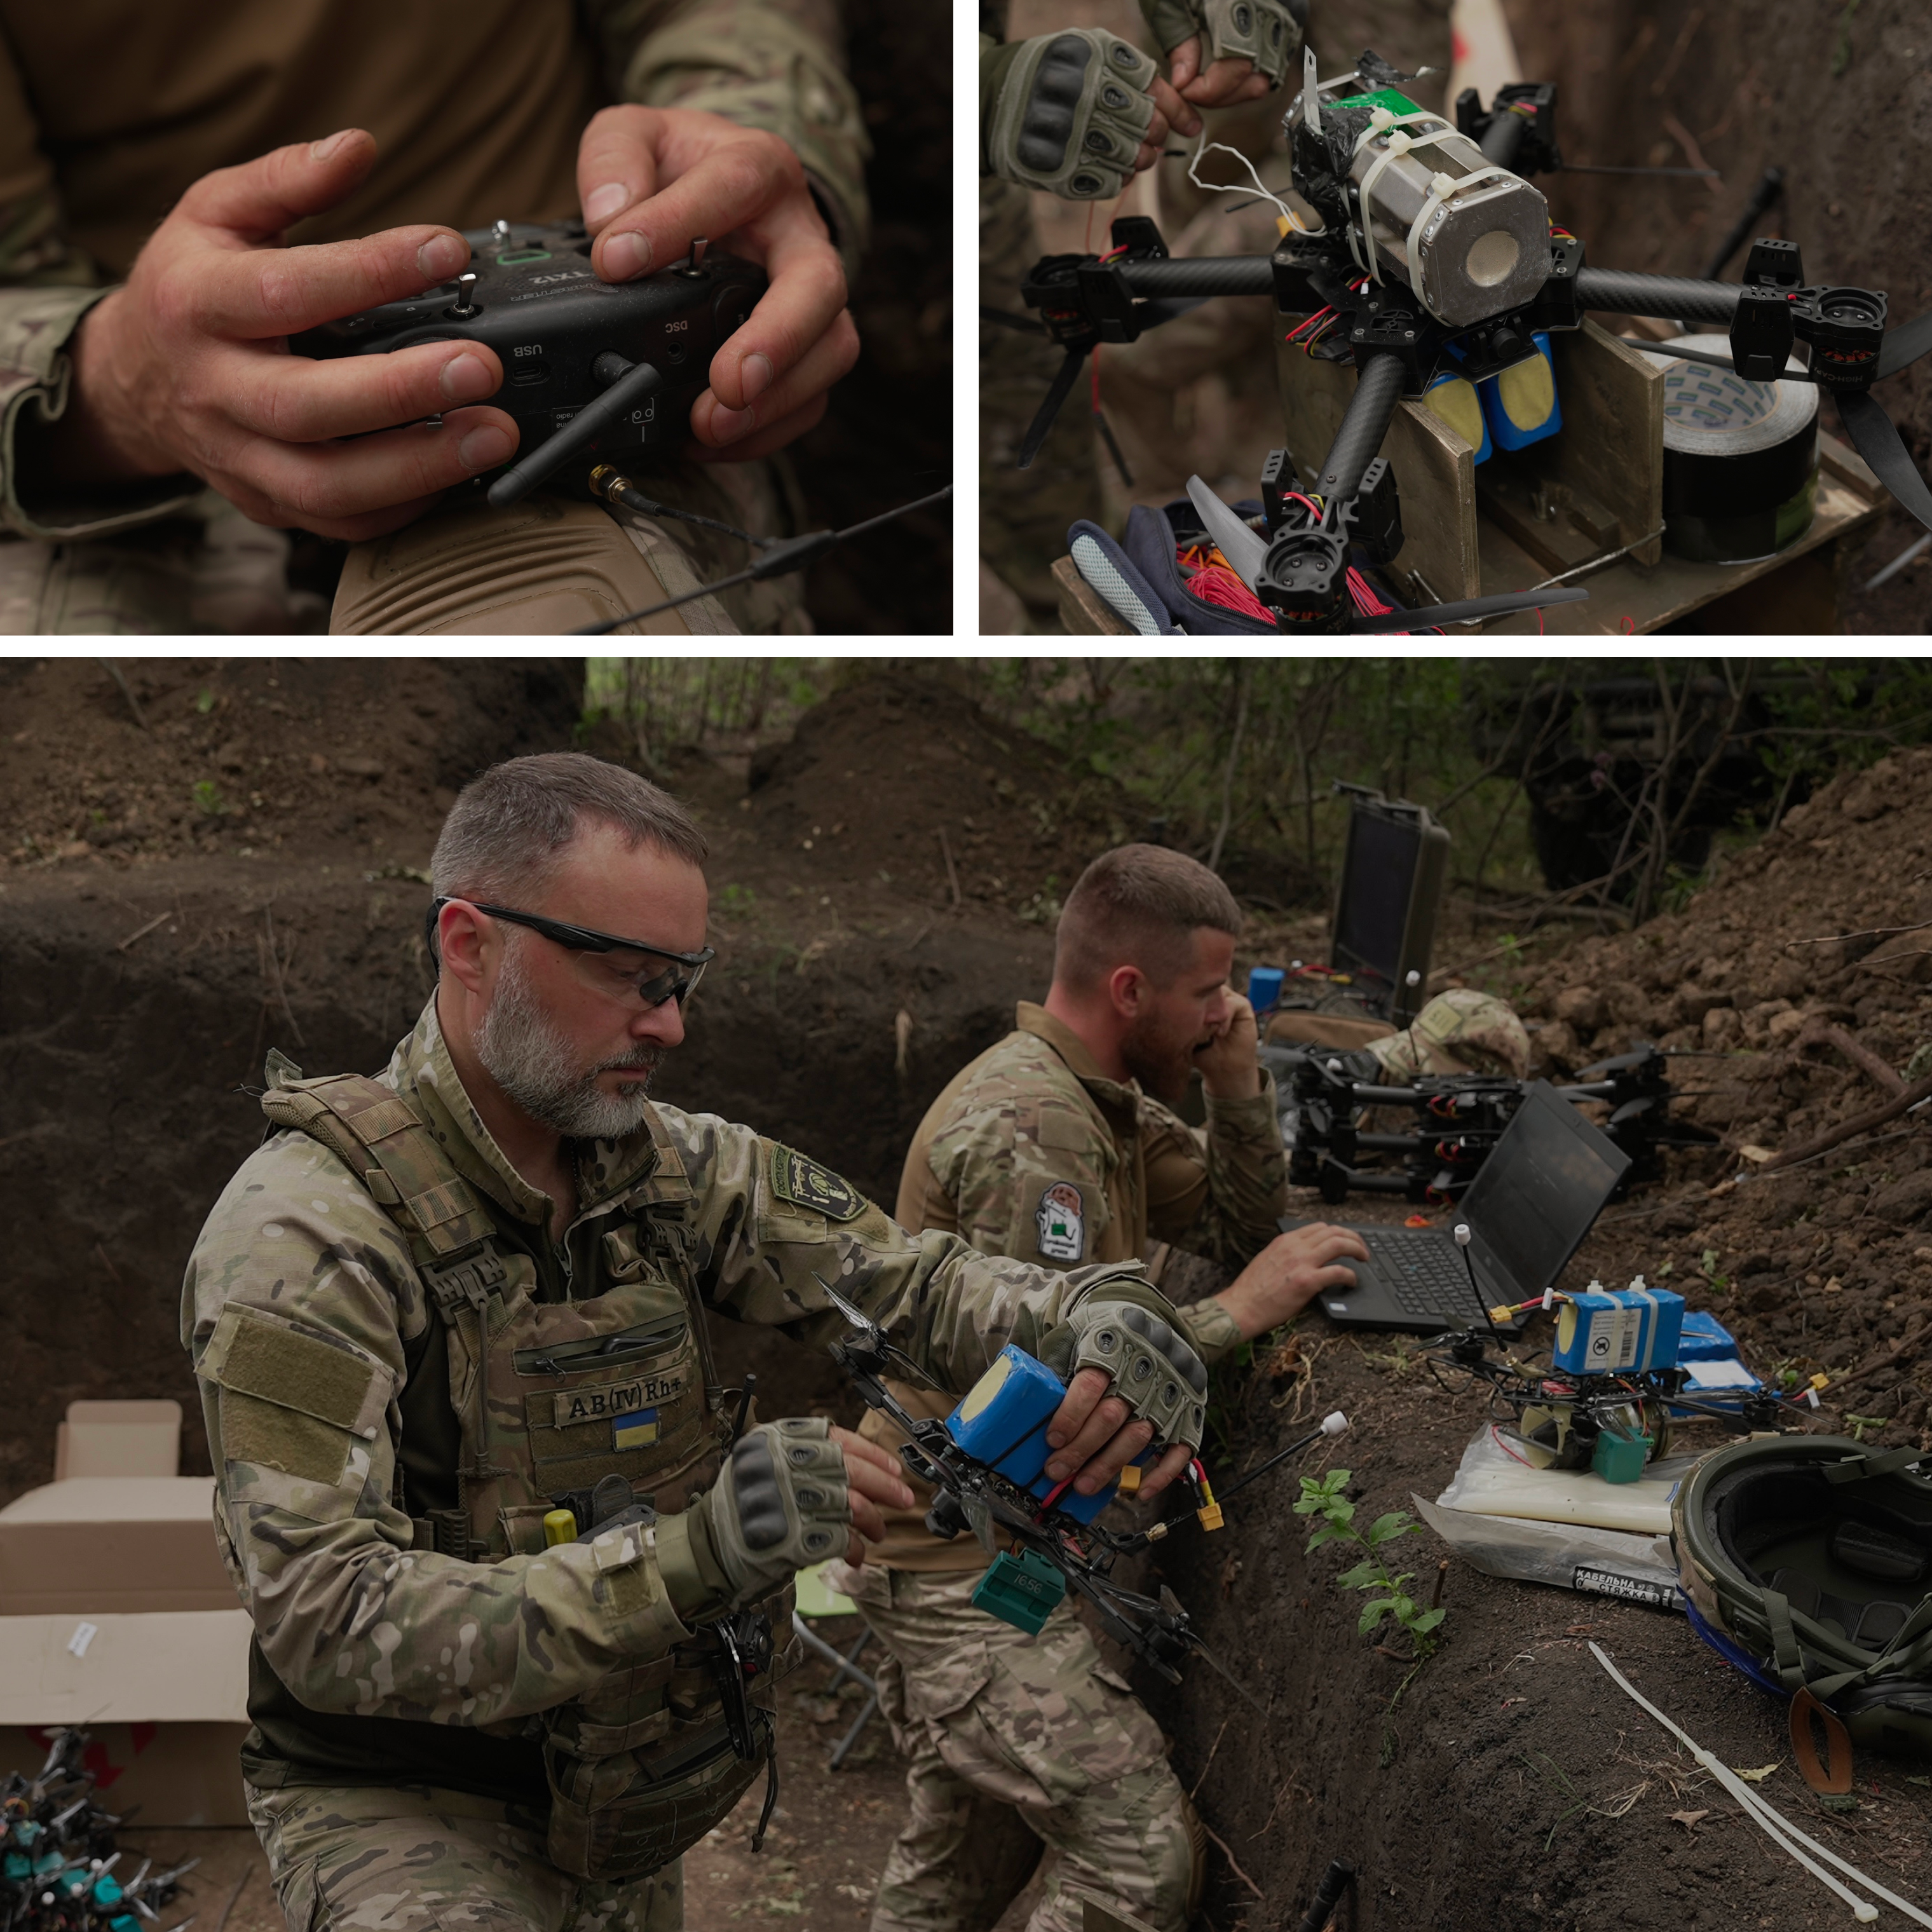 A grid of photos showing soldiers in a ditch dug into soil controlling small drones with laptops and controllers